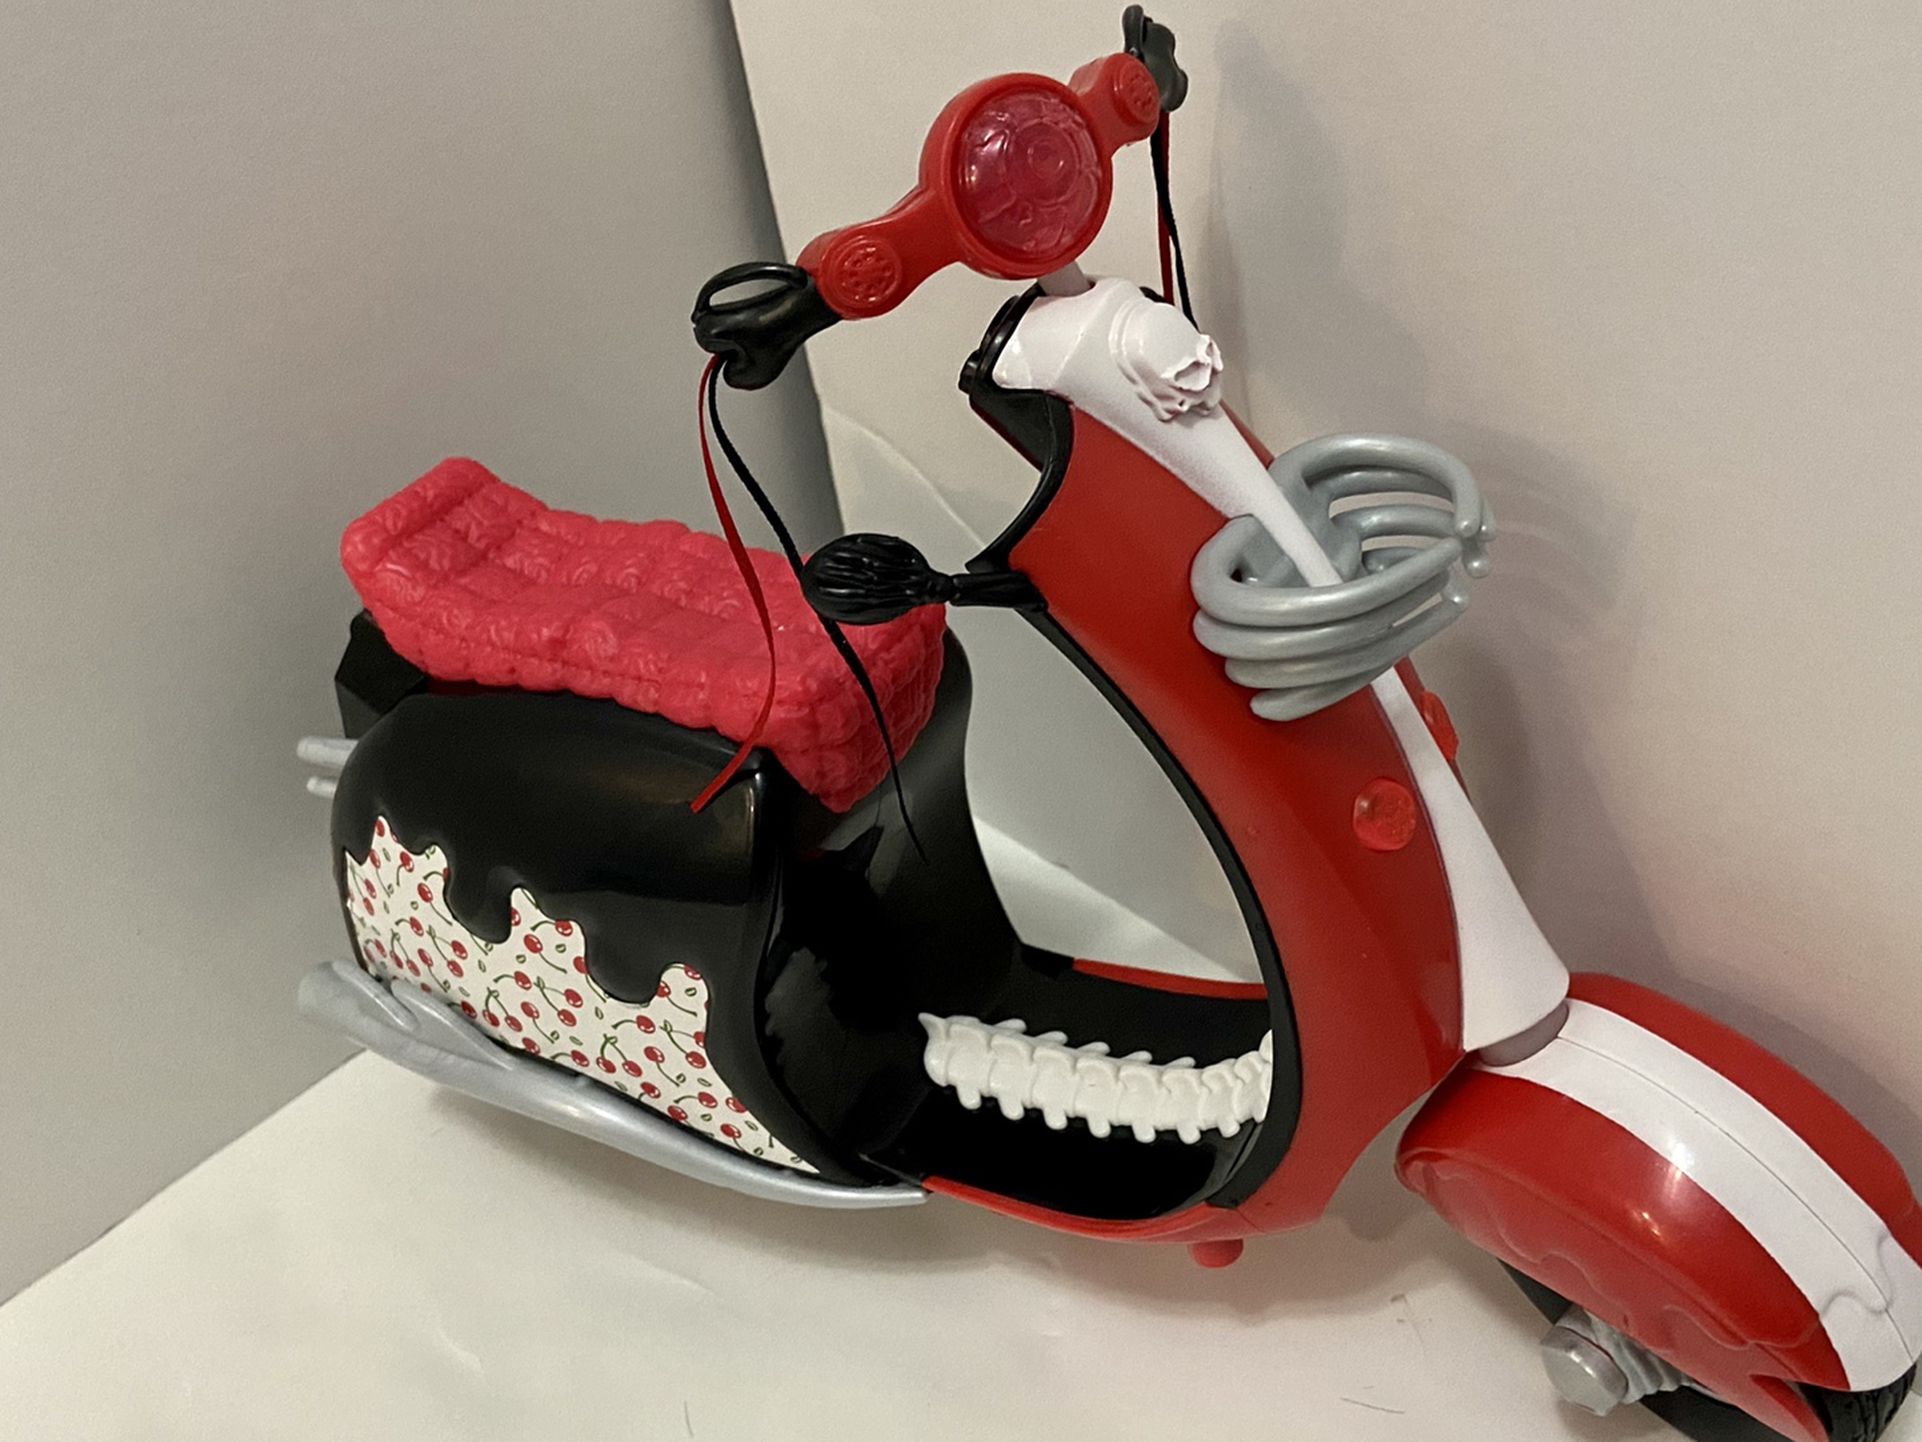 Monster High Ghoulia Yelps Scooter